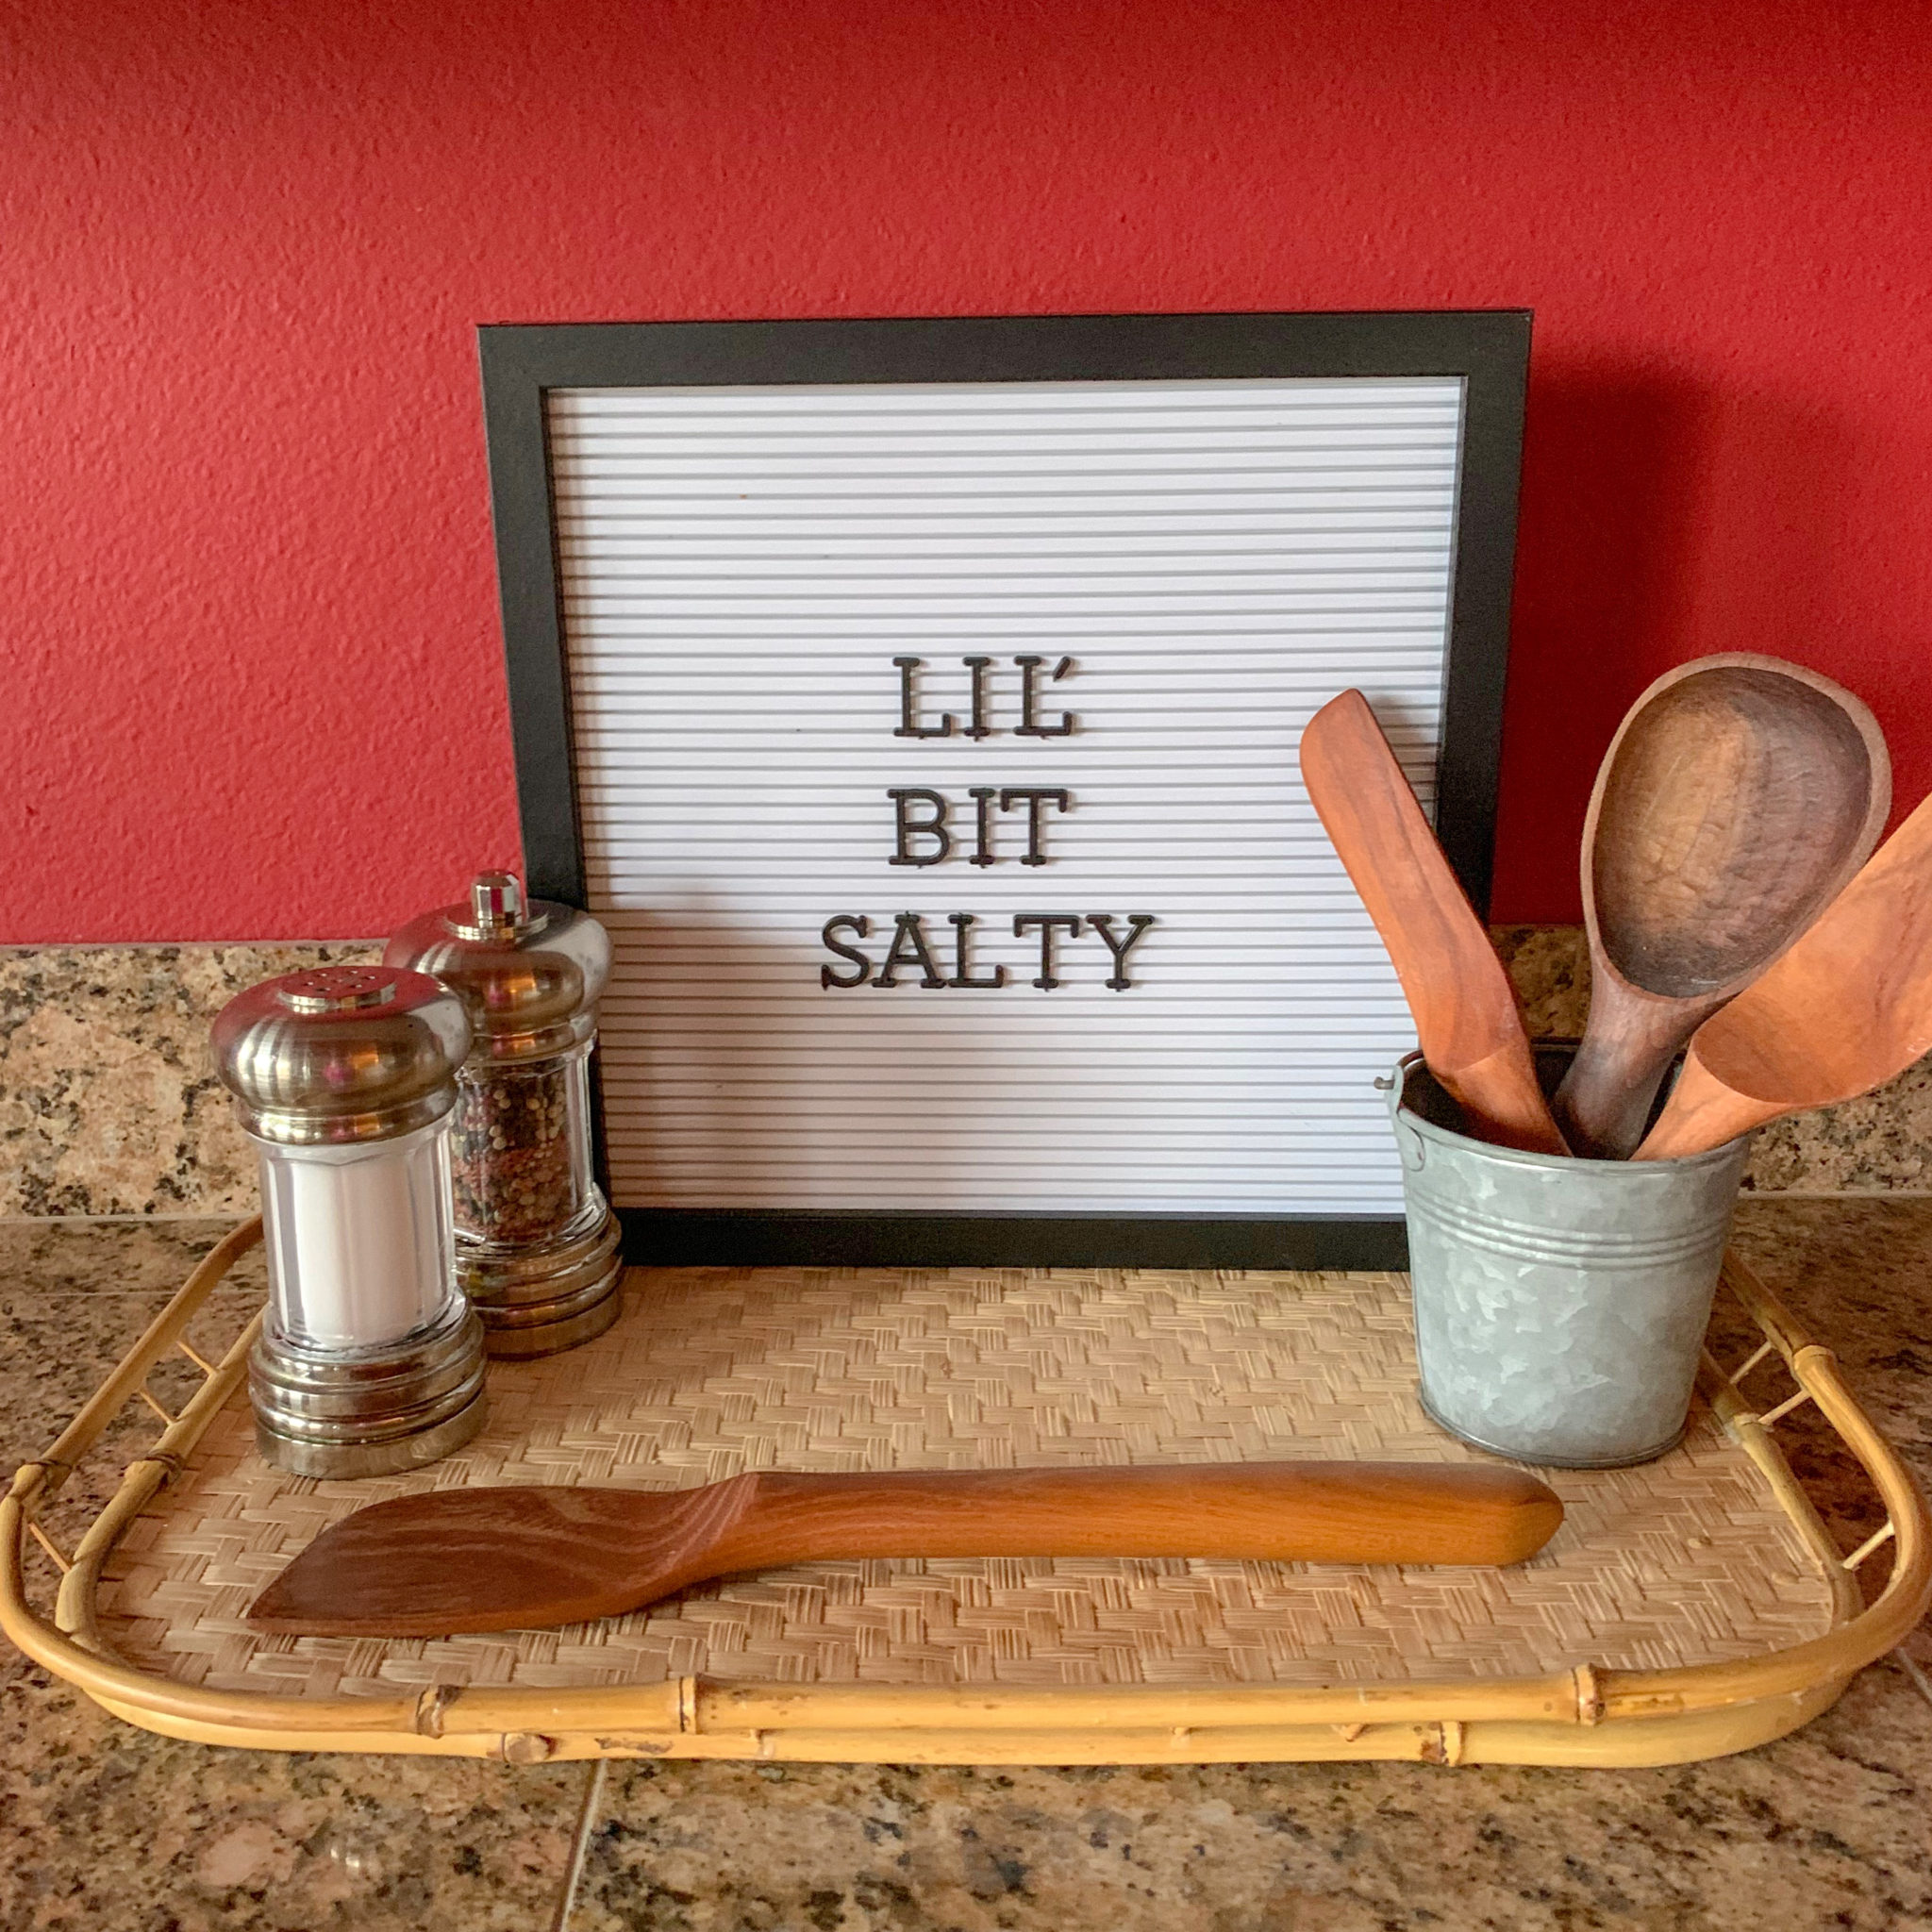 Funny Cooking Quotes for Letter Boards - The Gifted Gabber